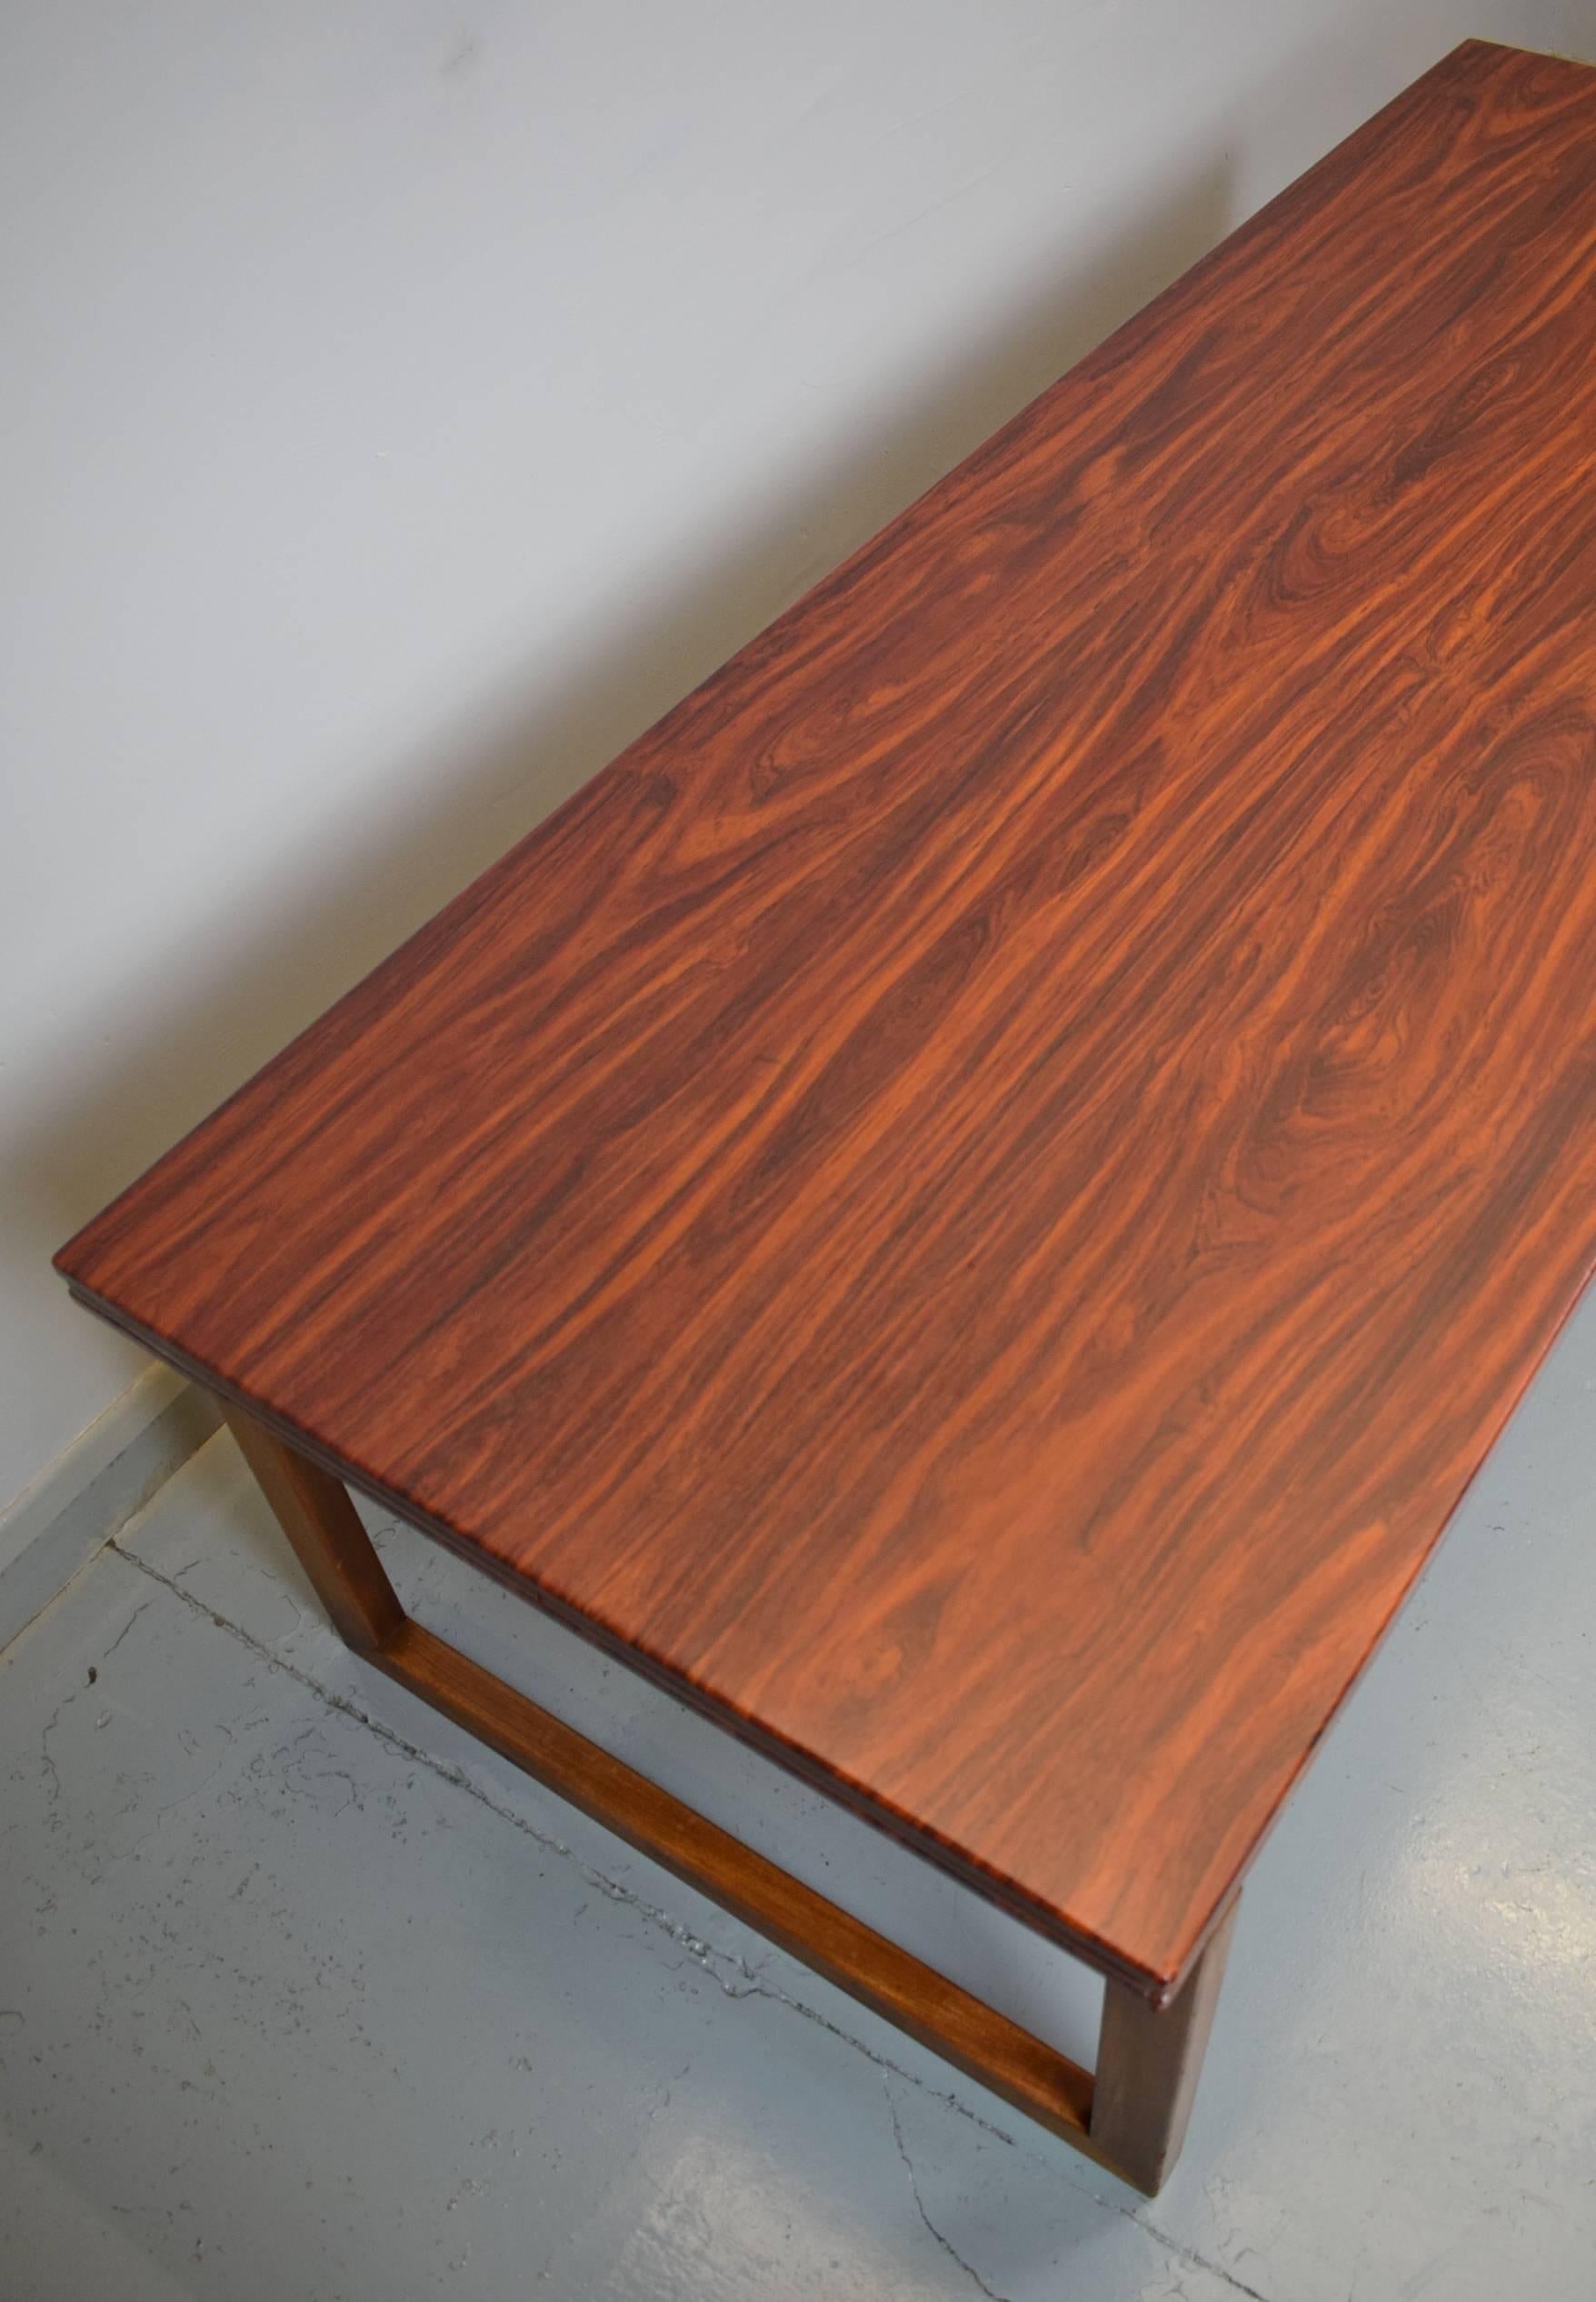 Designer: Danish design

Manufacturer: Anton Kildeberg Møbelfabrik

Country: Denmark

Date: 1970s

Material: Rosewood laminate with beechwood frame

Maximum dimensions: Width 170cm, depth 65cm and height 50cm

Condition: Excellent with